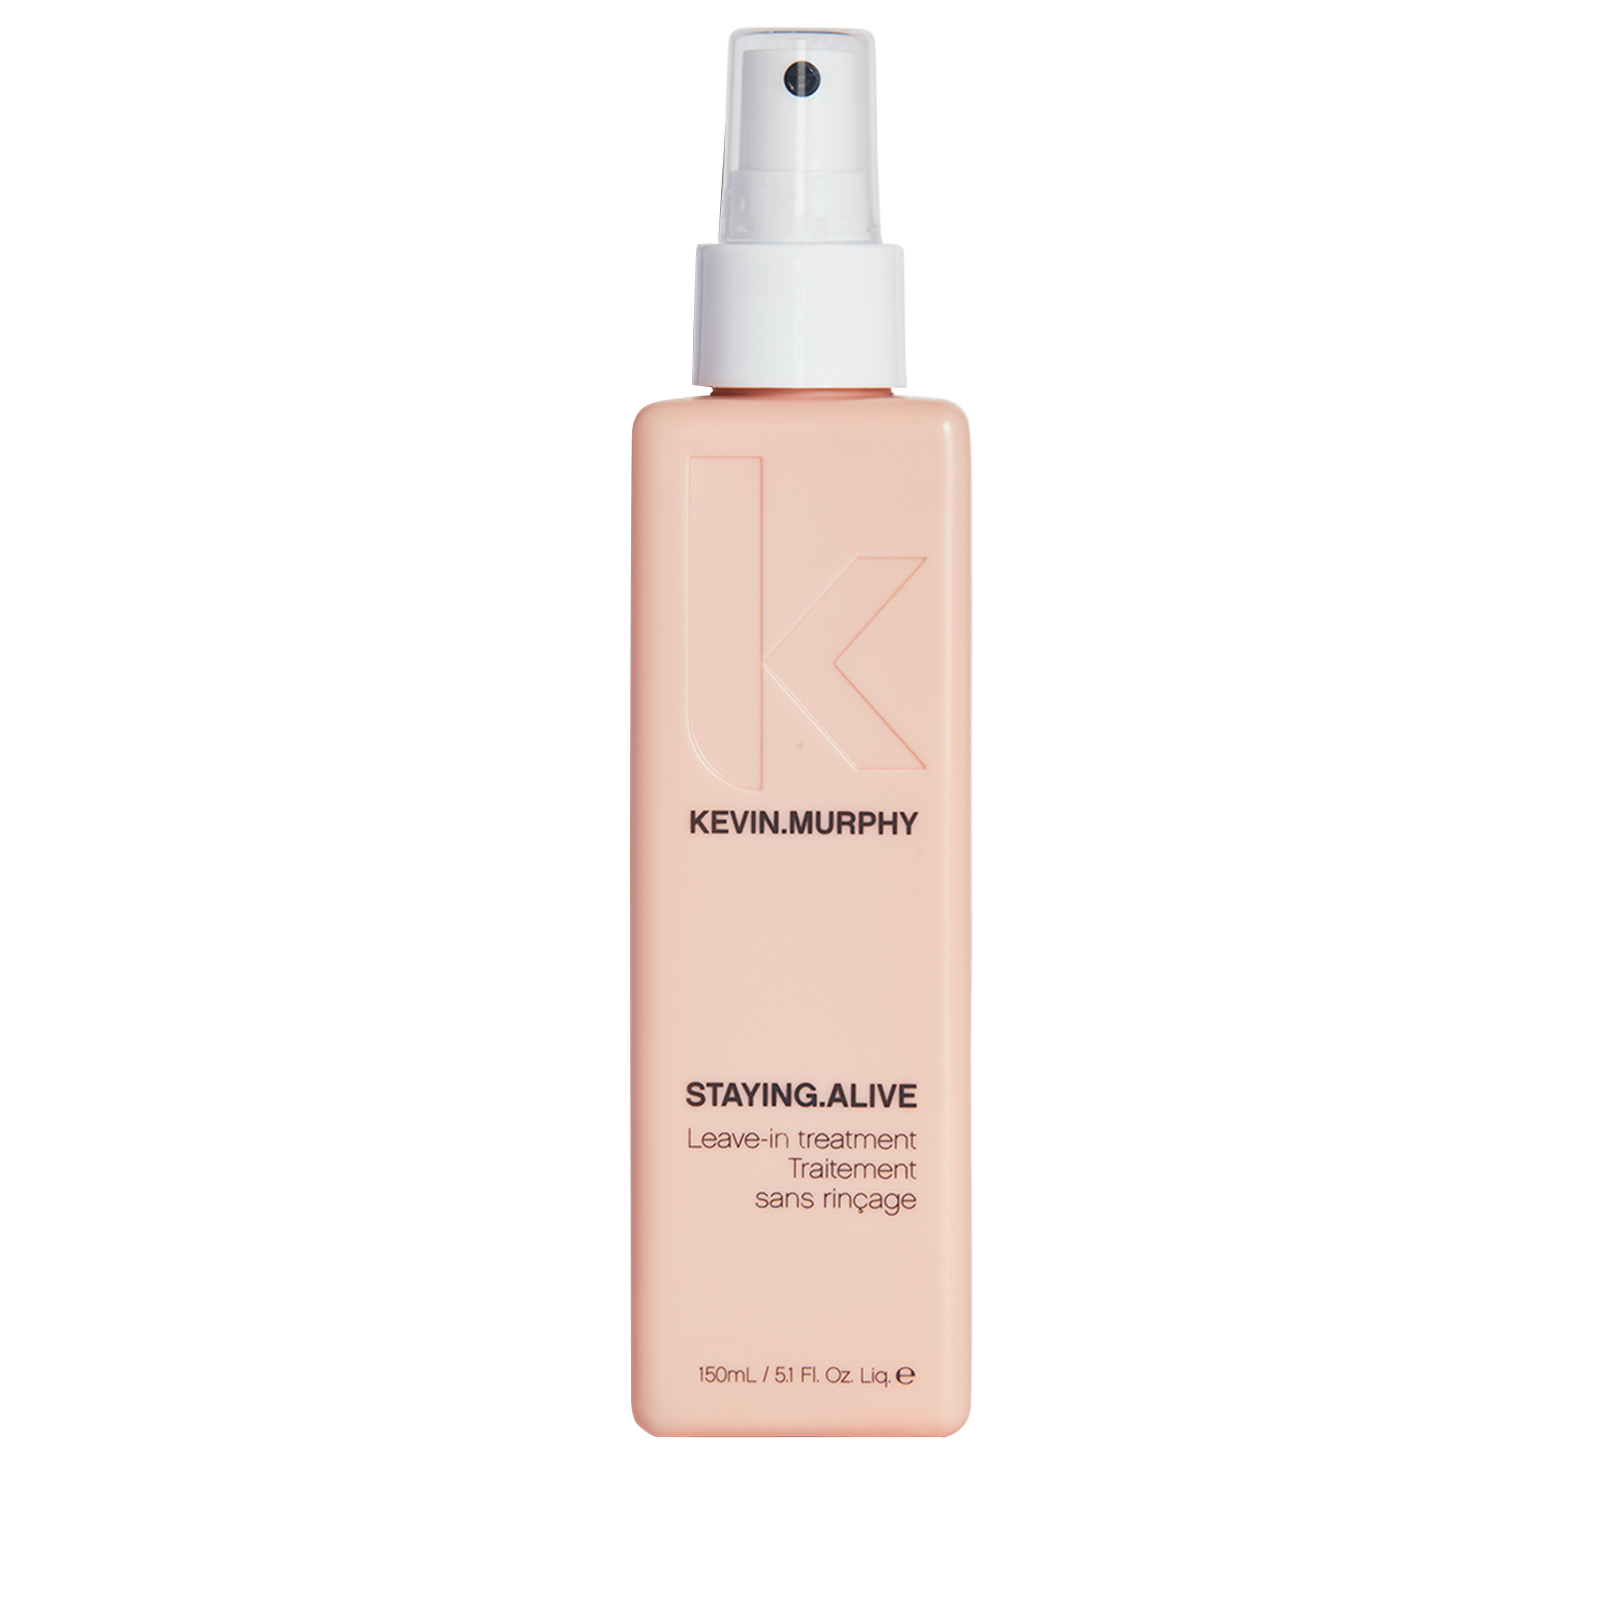 Kevin Murphy Staying Alive- Leave-in tratament de reparare 150ml haircare.ro imagine